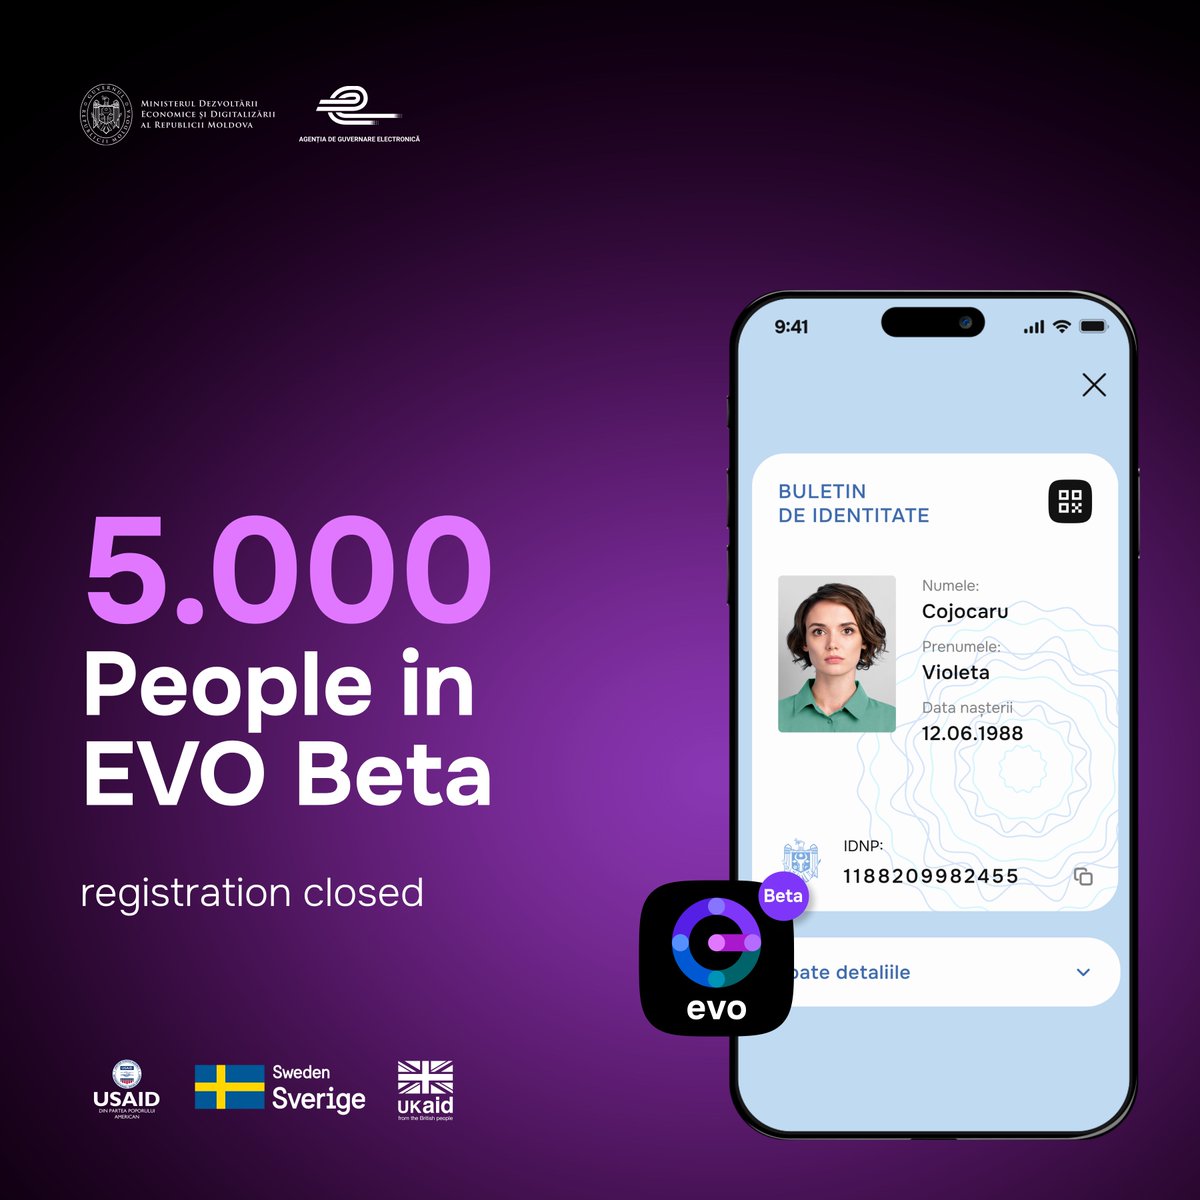 Over 5,000 have joined to test EVO Beta, reaching full capacity! Registration for testing is now closed, but you can still sign up to be notified about the launch at evo.gov.md. Details ➡️ mded.gov.md/inregistrarile…